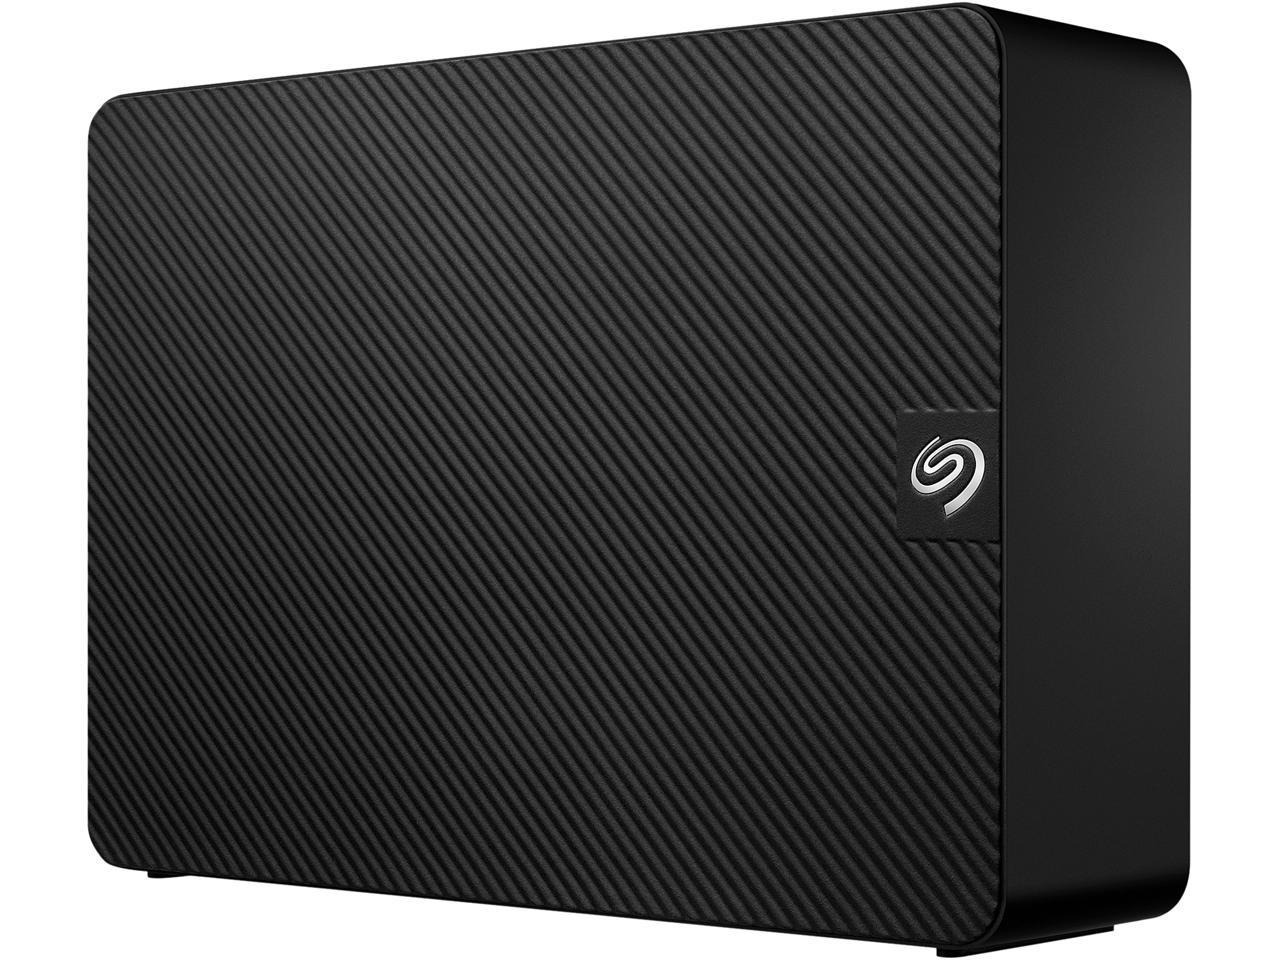 14TB Seagate Expansion External Hard Drive USB 3.0 w/ Rescue Data Recovery Services $218.99 + Free Shipping